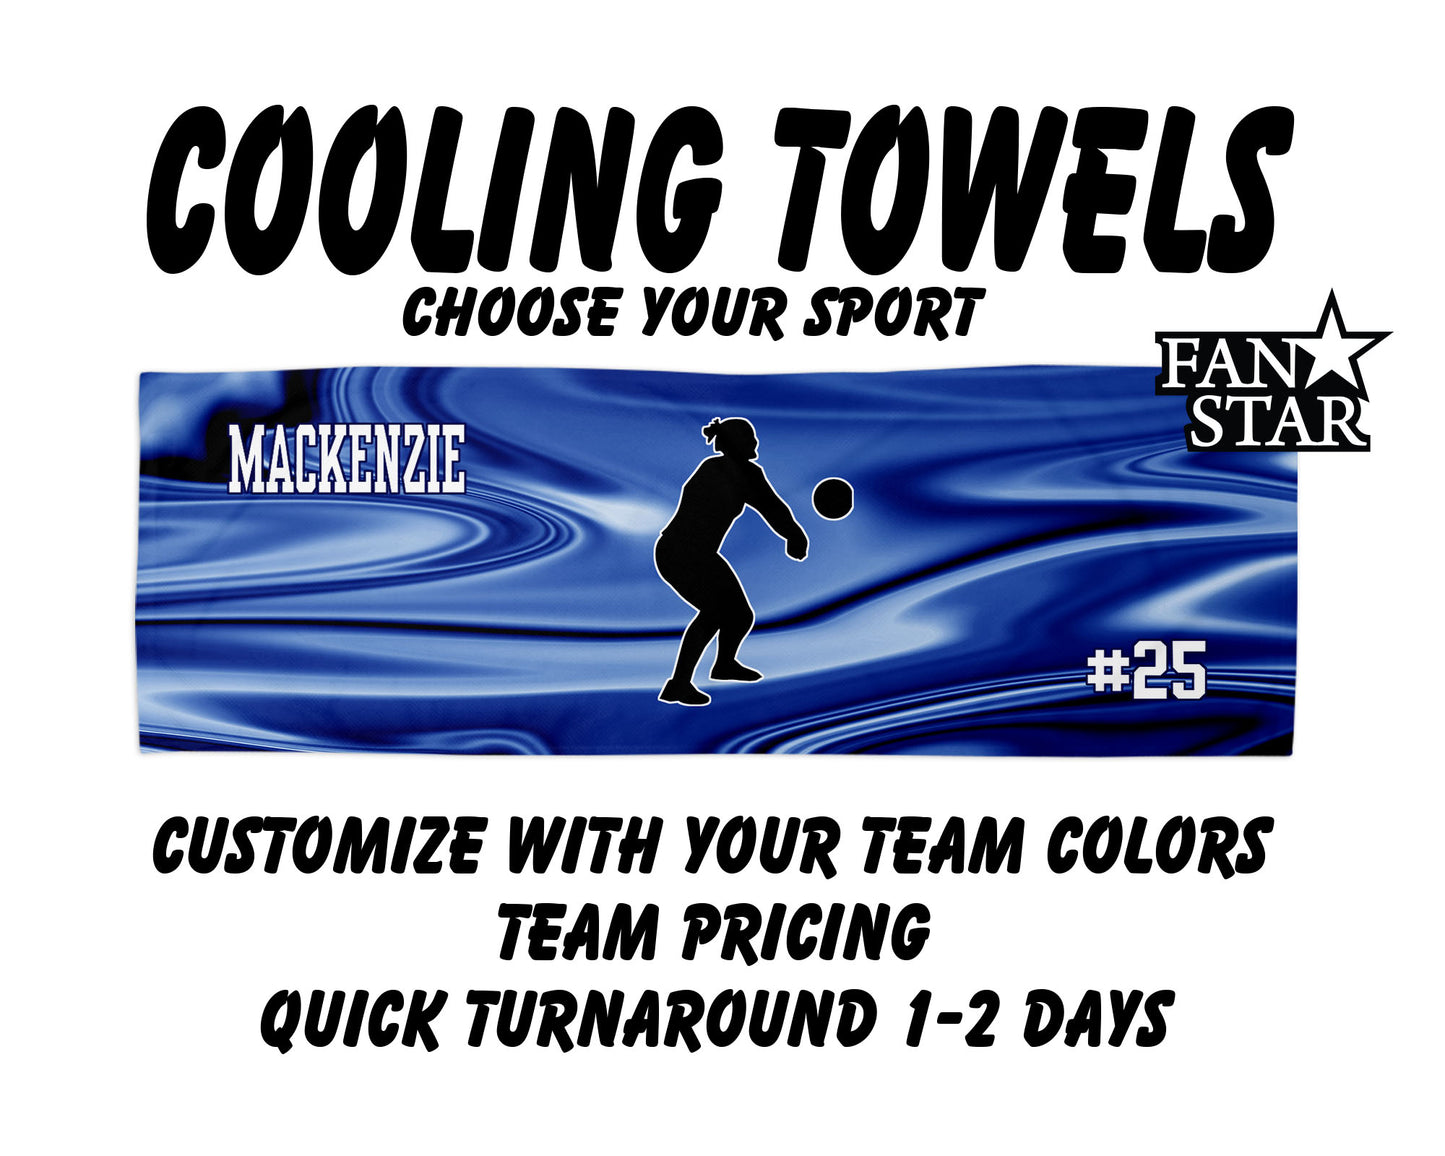 Volleyball Cooling Towel with Waves Background